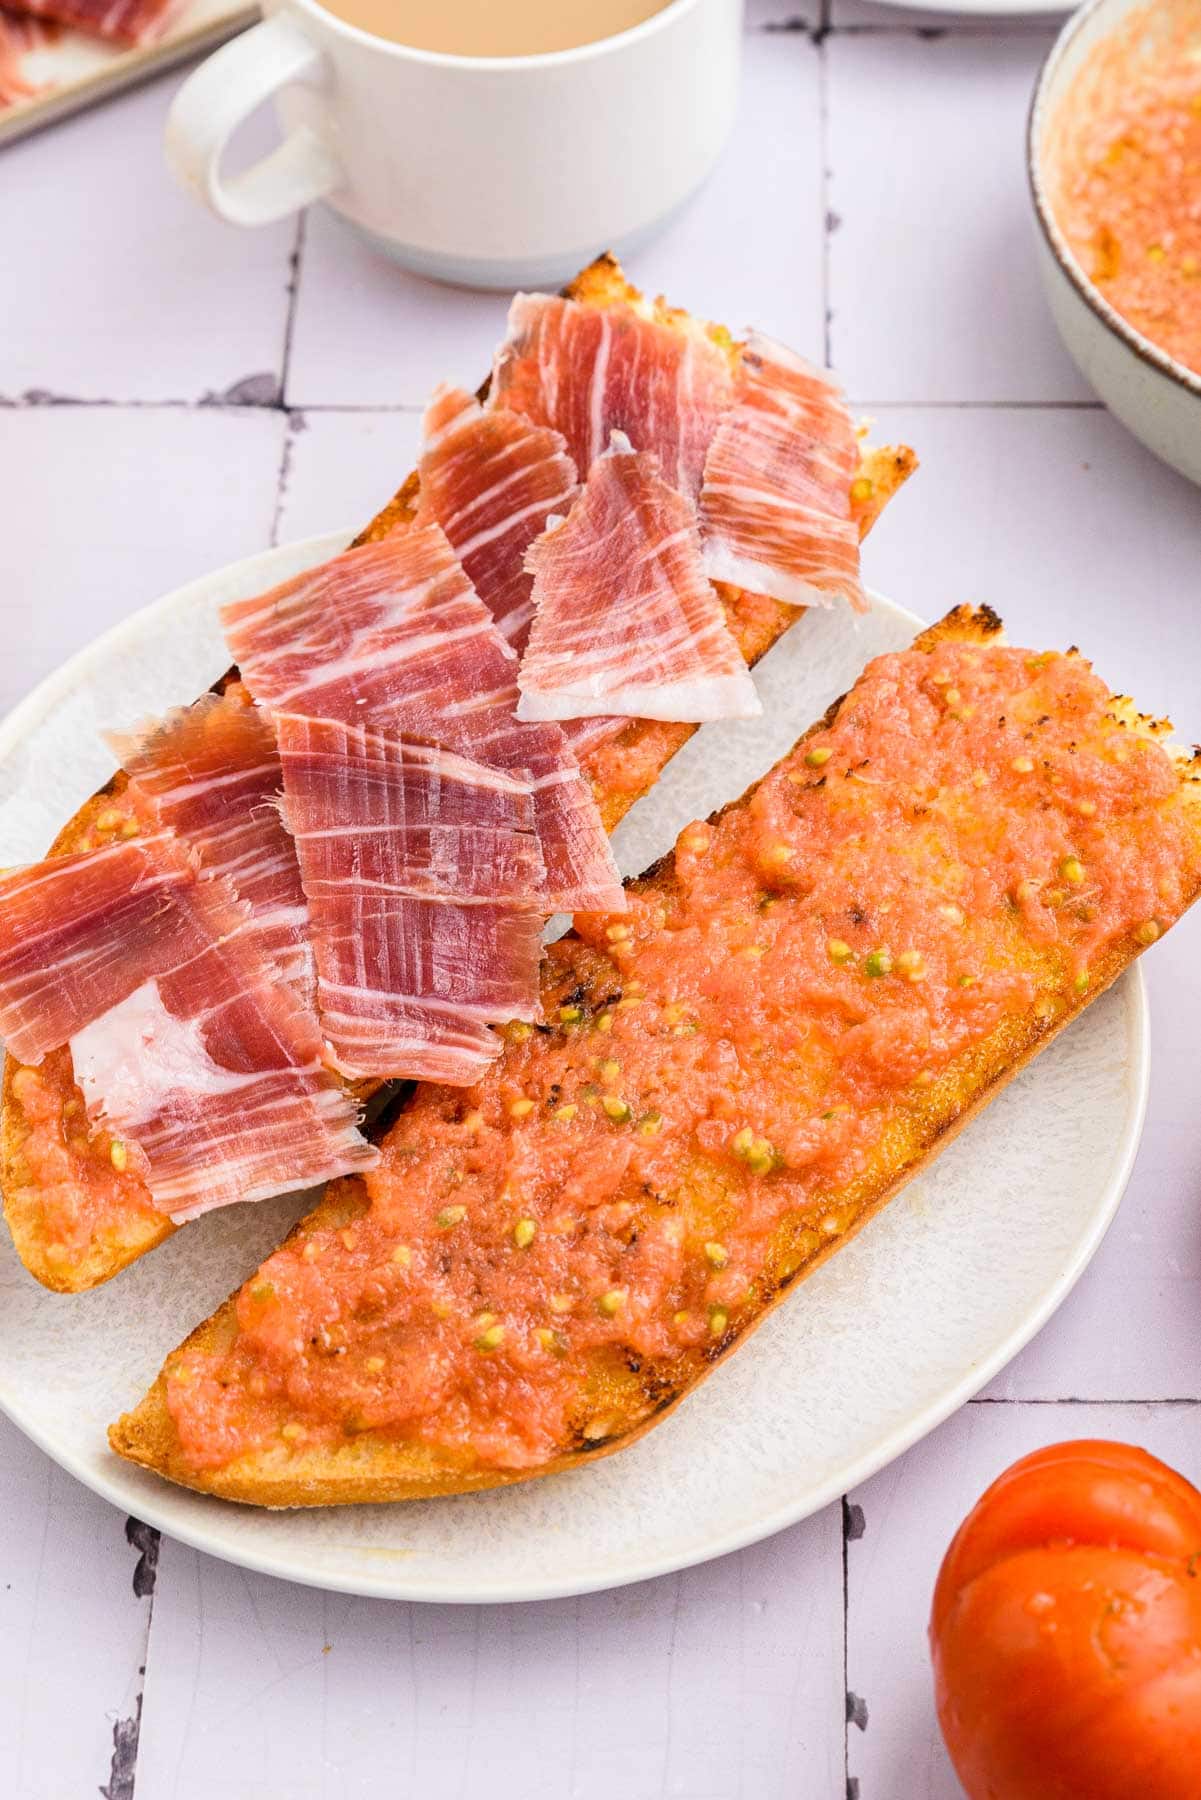 tomato spread on fresh bread with ham placed on top all on white plate.